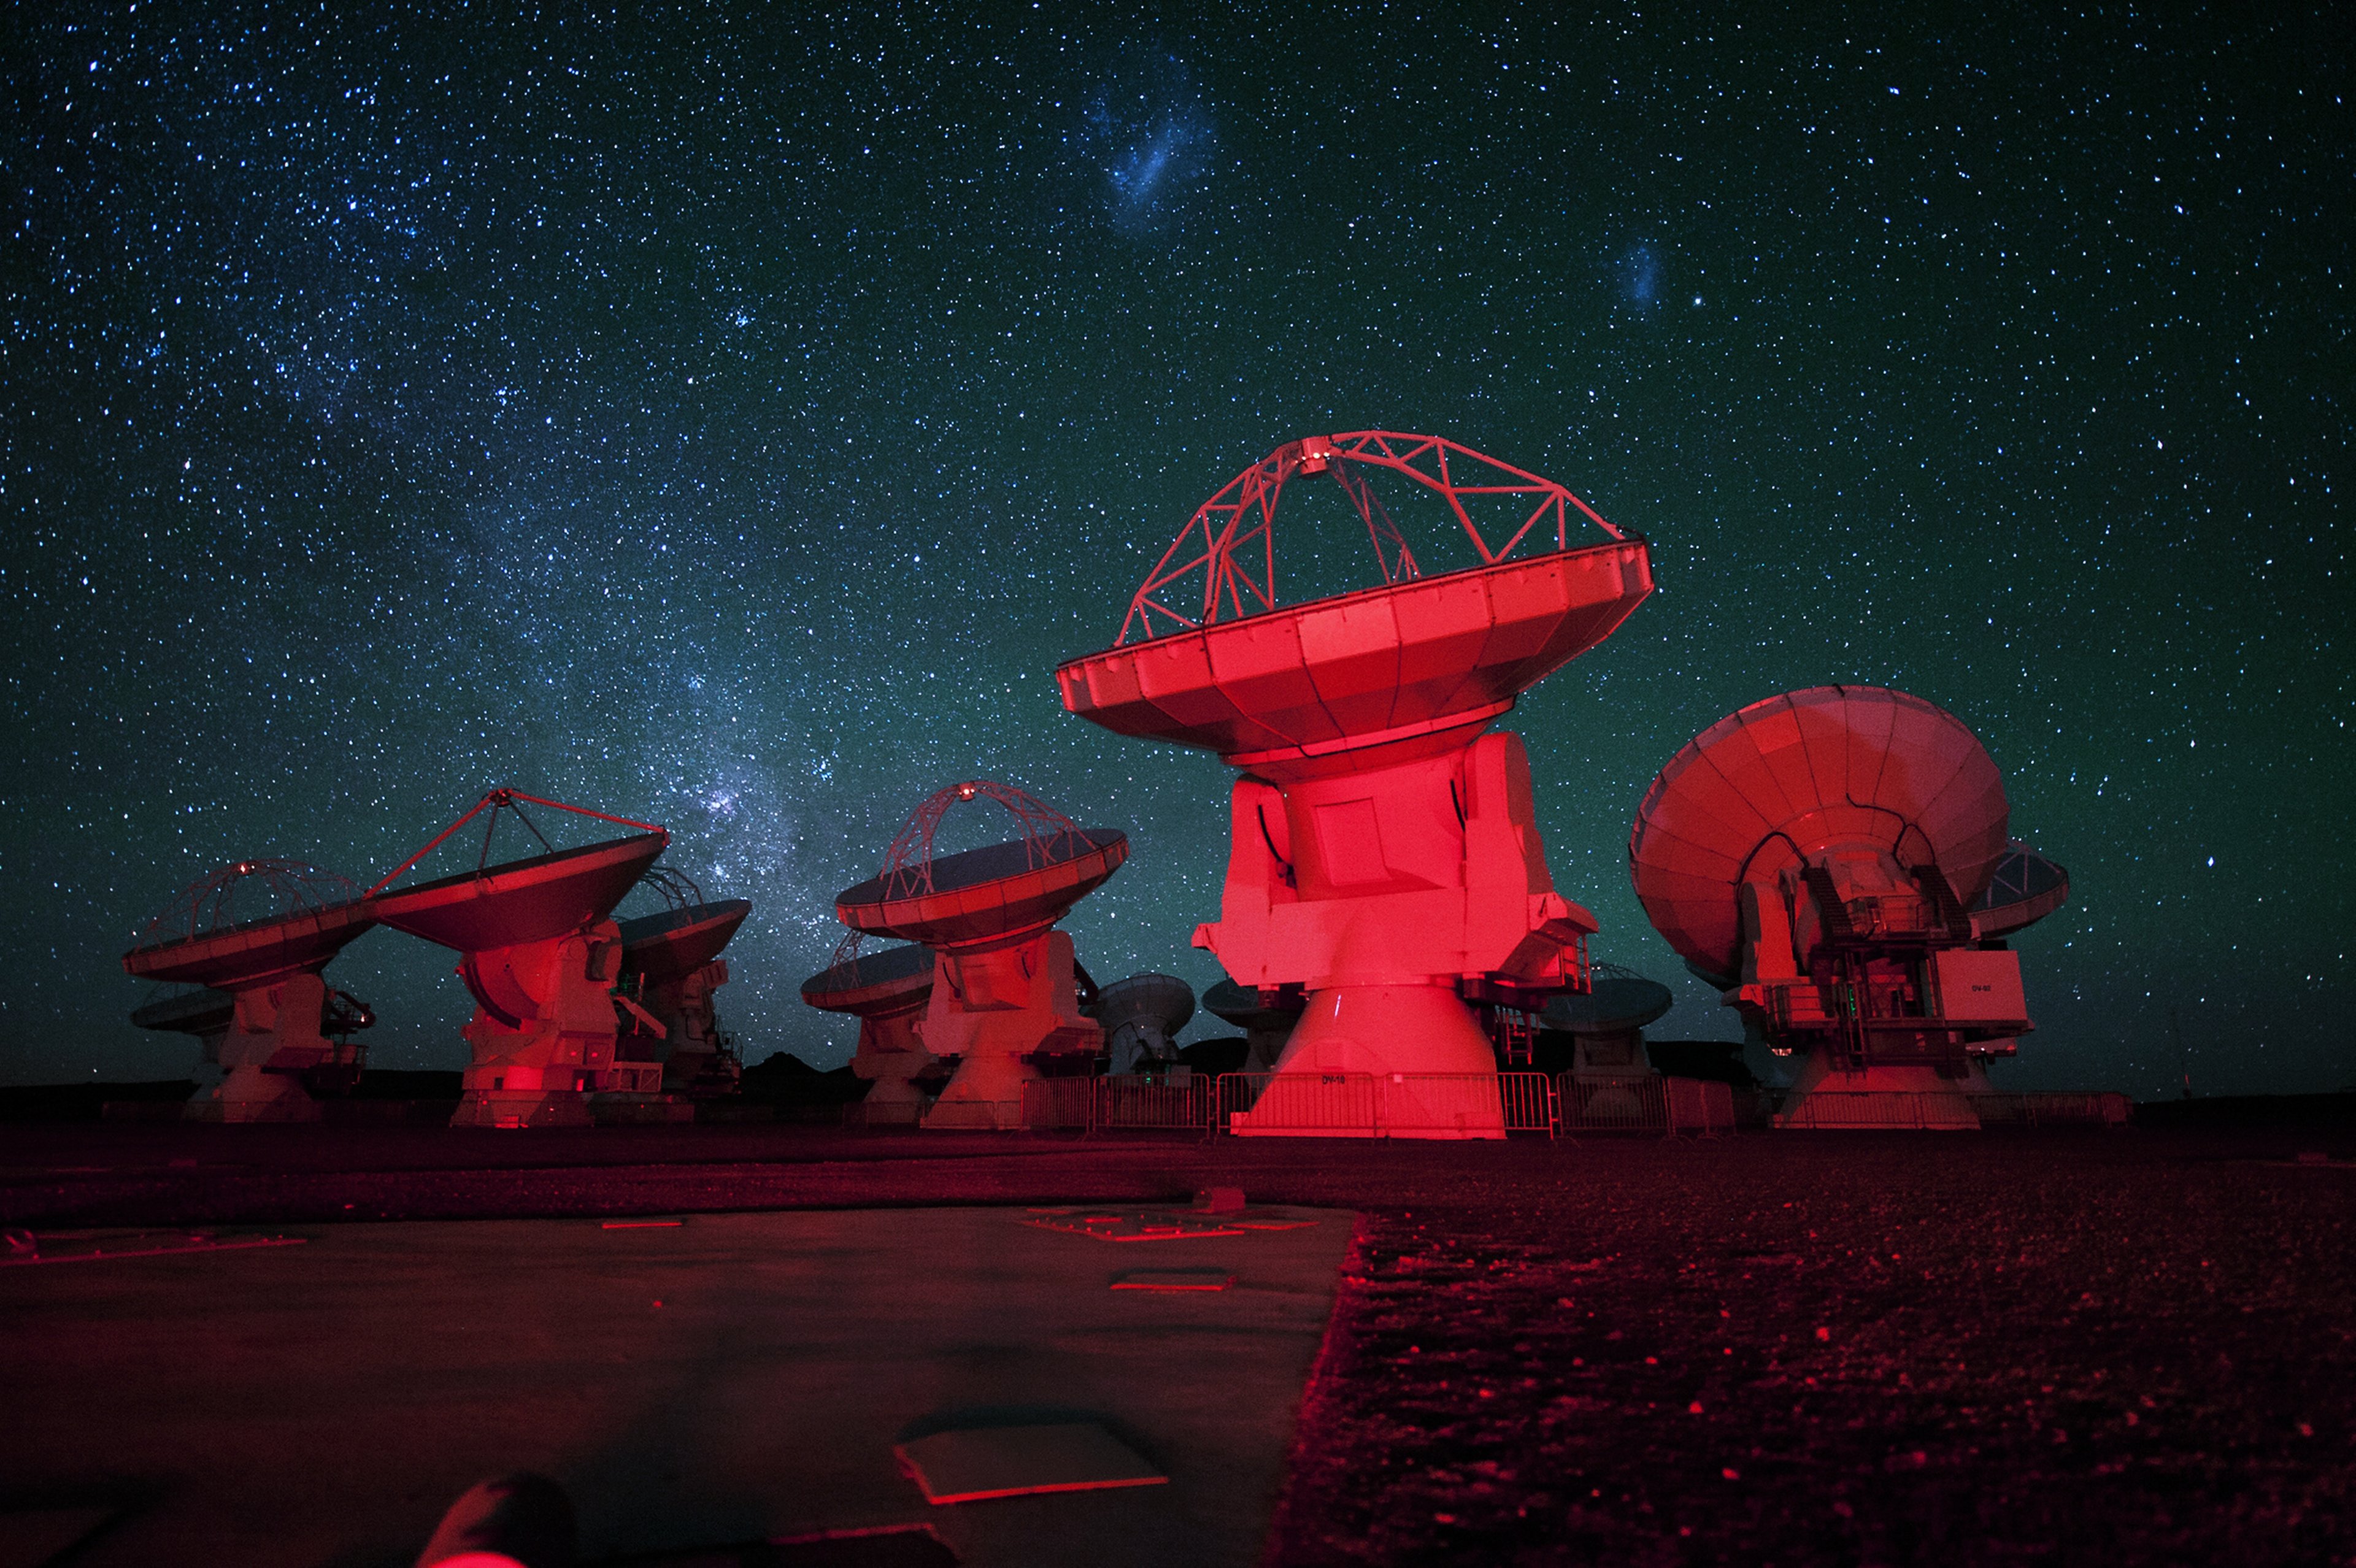 radioteleskop, Radar, Stars, Dish, Moon, Milky, Way, Radio, Antenna, Astronomy, Satellites, Frequency, Parabolic, Electromagnetic, Interference, Sources, Space, Probes, Observatories, Light, Pollution, Optical, Wallpaper